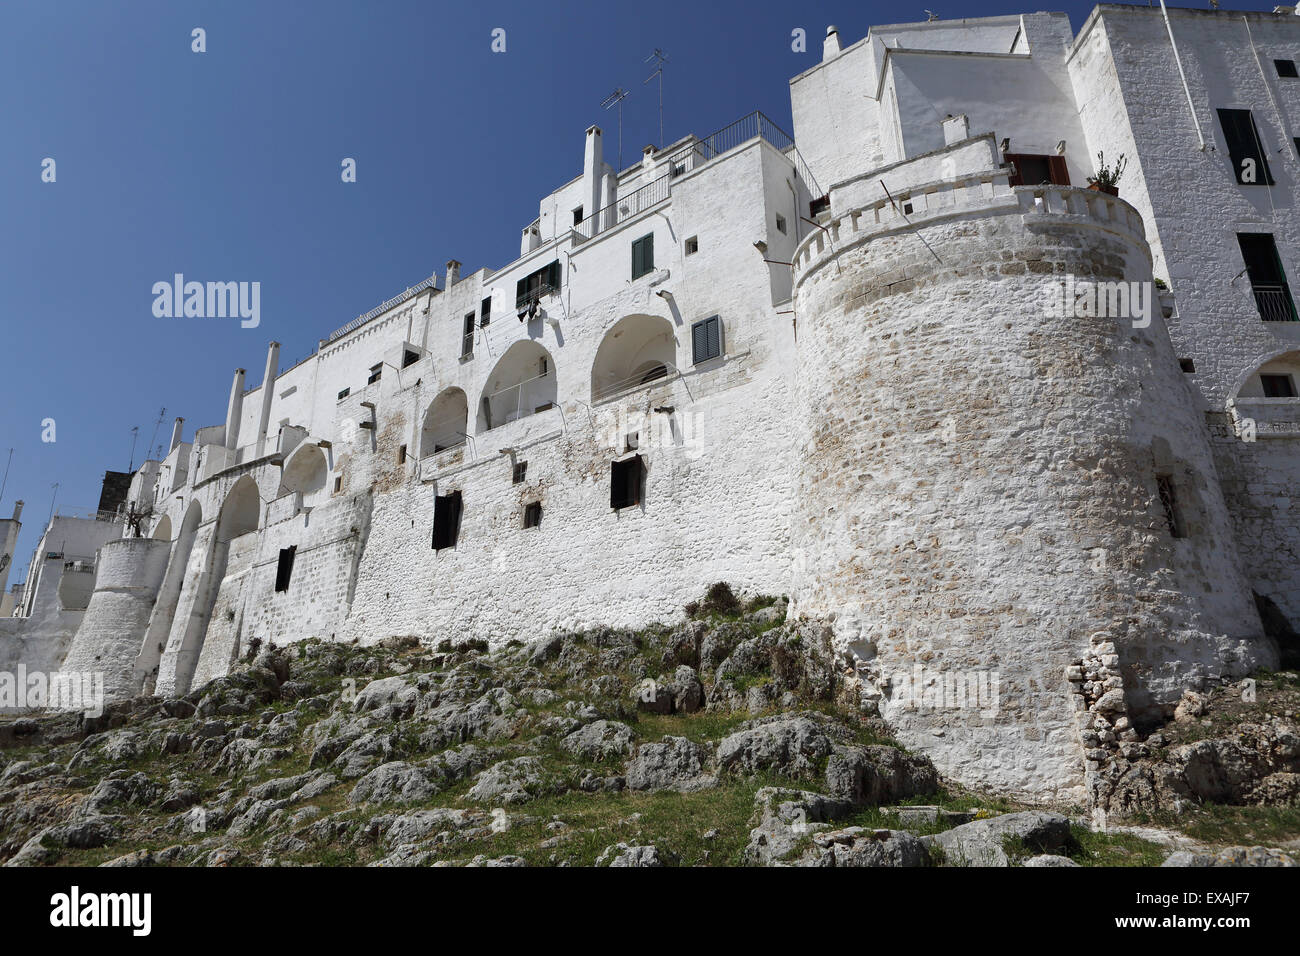 The whitewashed city wall, including a defensive tower, in the white city (Citta Bianca), Ostuni, Apulia, Italy, Europe Stock Photo